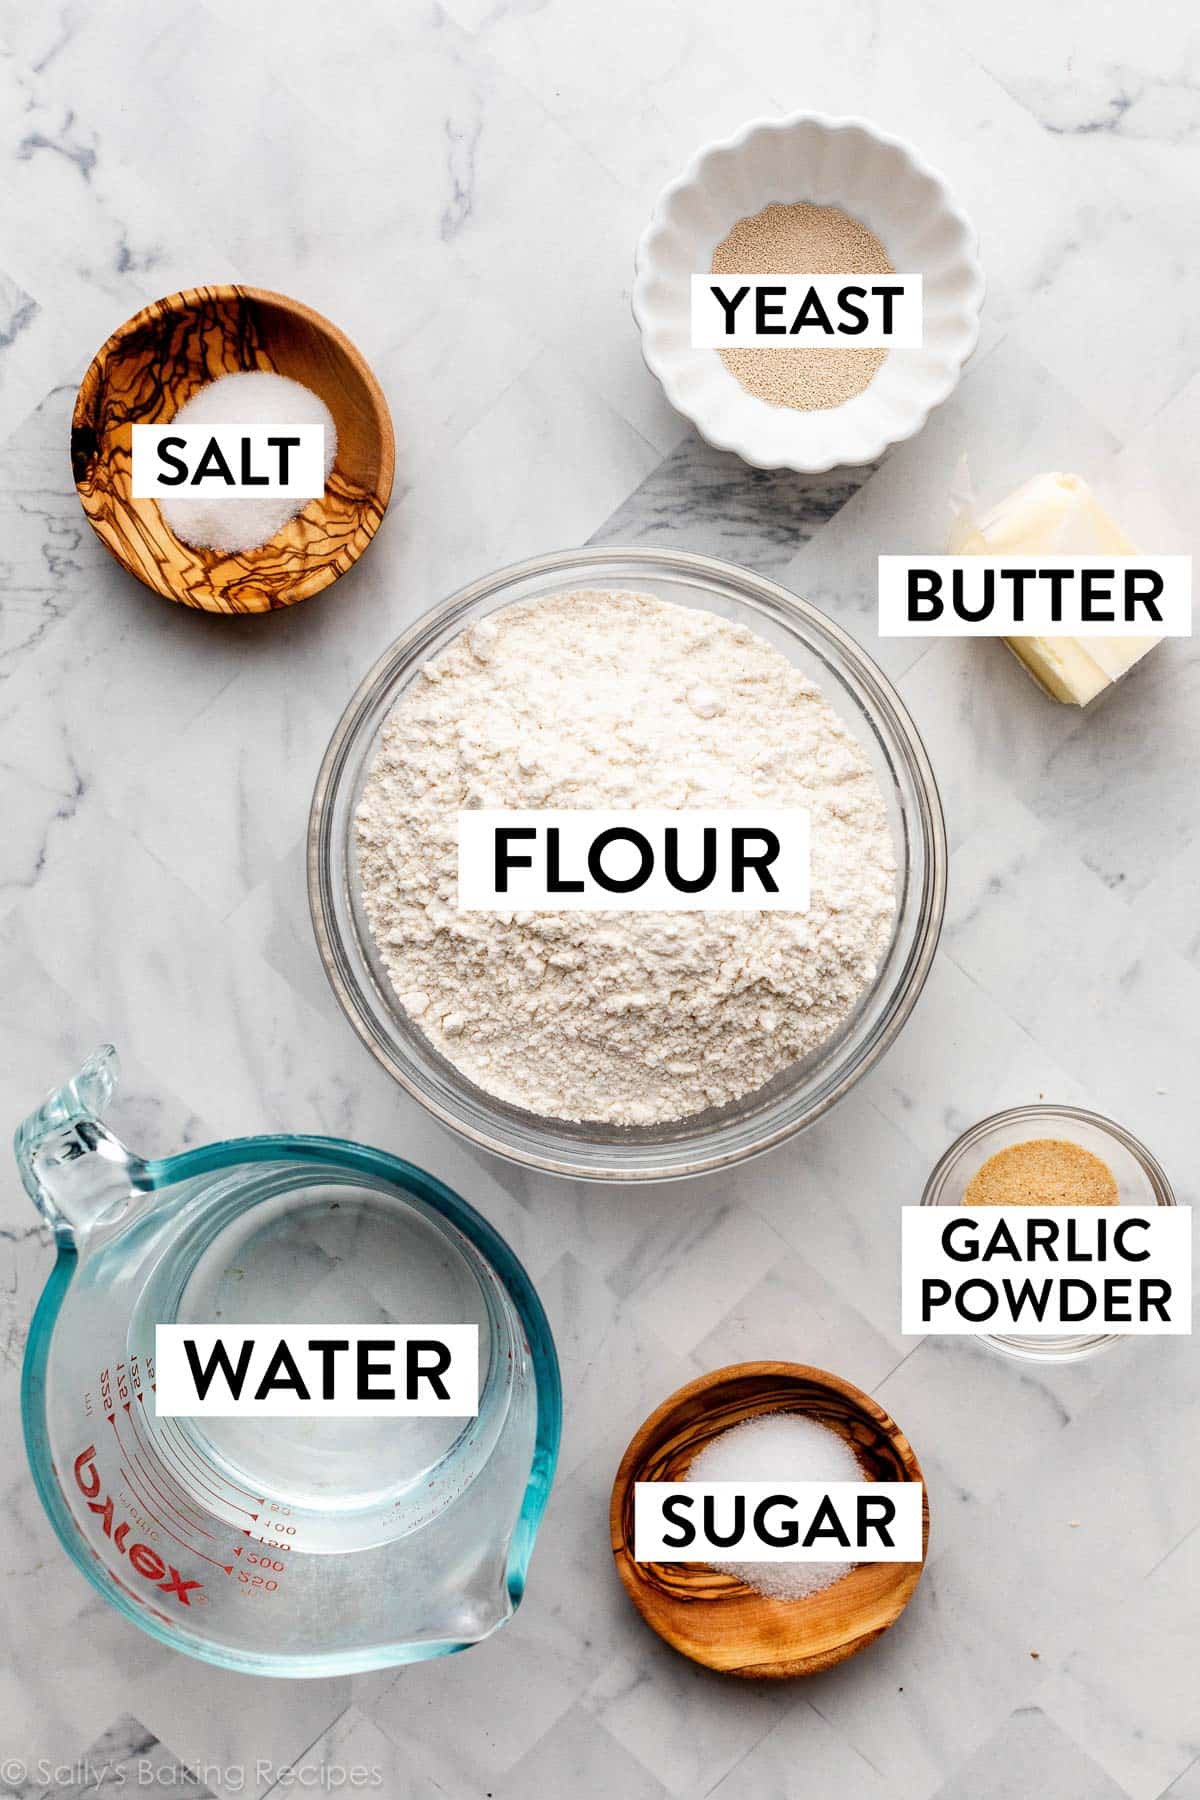 ingredients in bowls on counter including flour, butter, garlic powder, sugar, water, salt, and yeast.